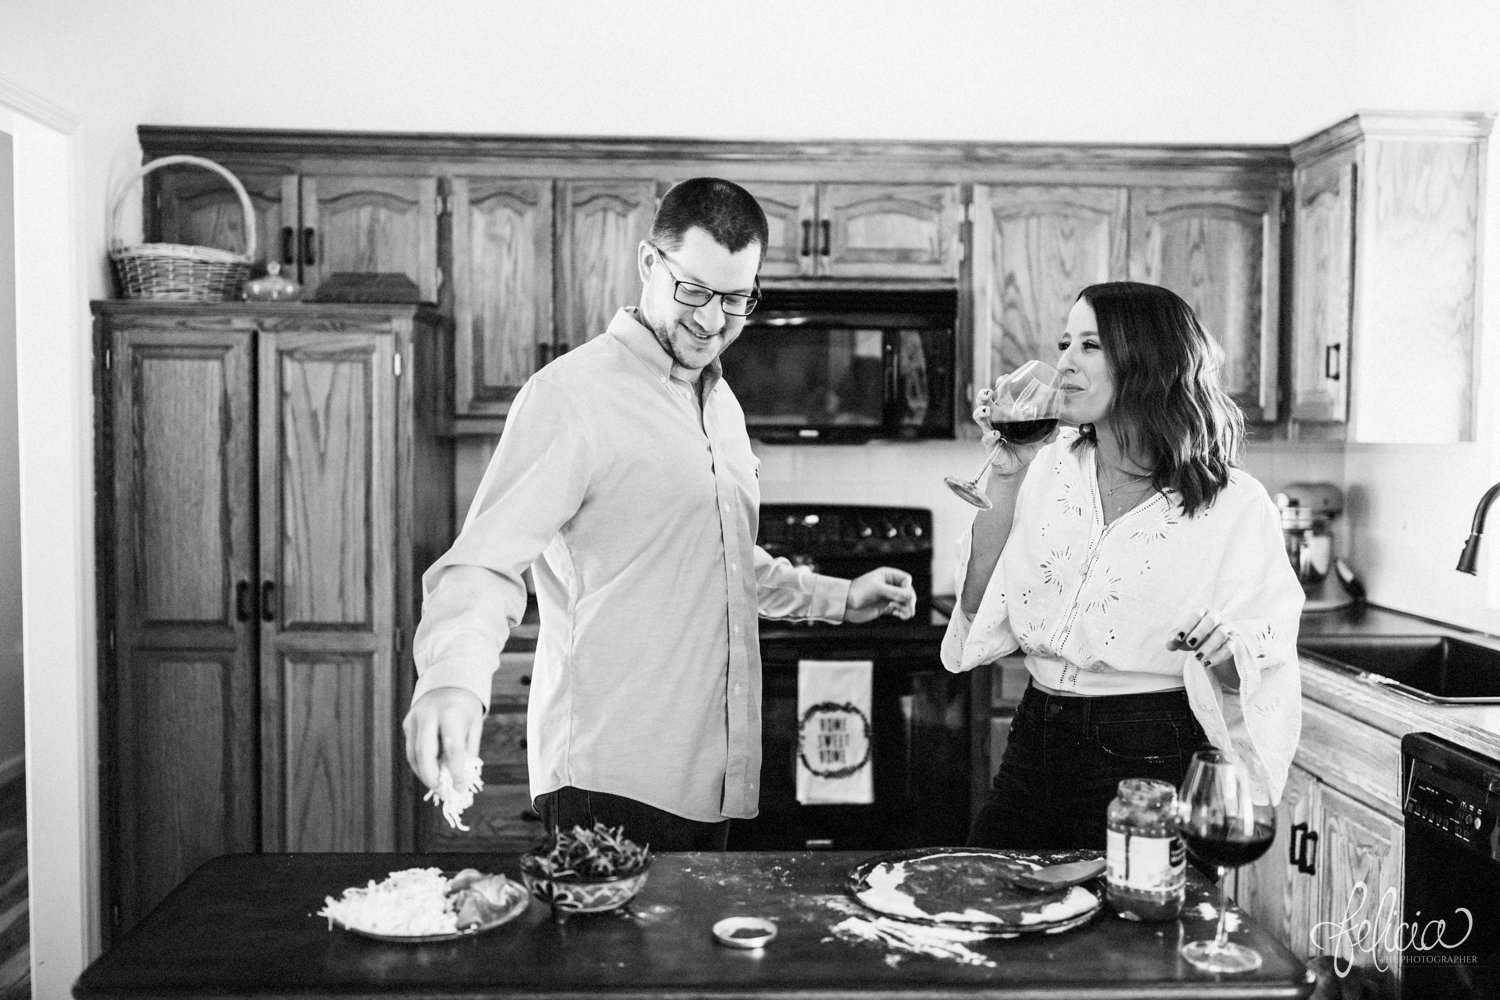 images by feliciathephotographer.com | destination photographer | engagement session | in home | lifestyle | kansas city | cooking from scratch | ingredients | crust | pizza | flour | details | romantic | black and white | silly | playful |